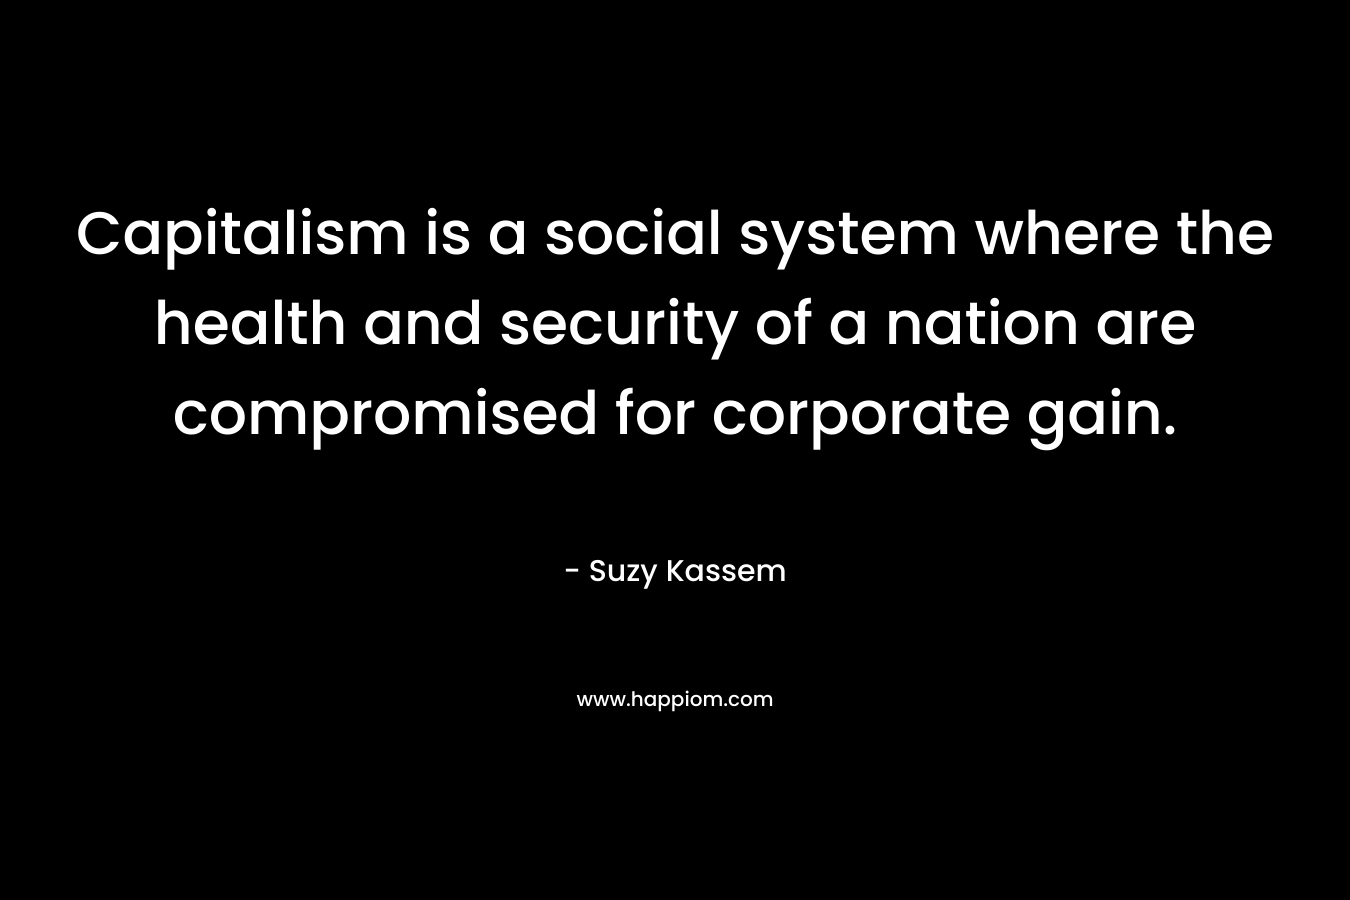 Capitalism is a social system where the health and security of a nation are compromised for corporate gain.